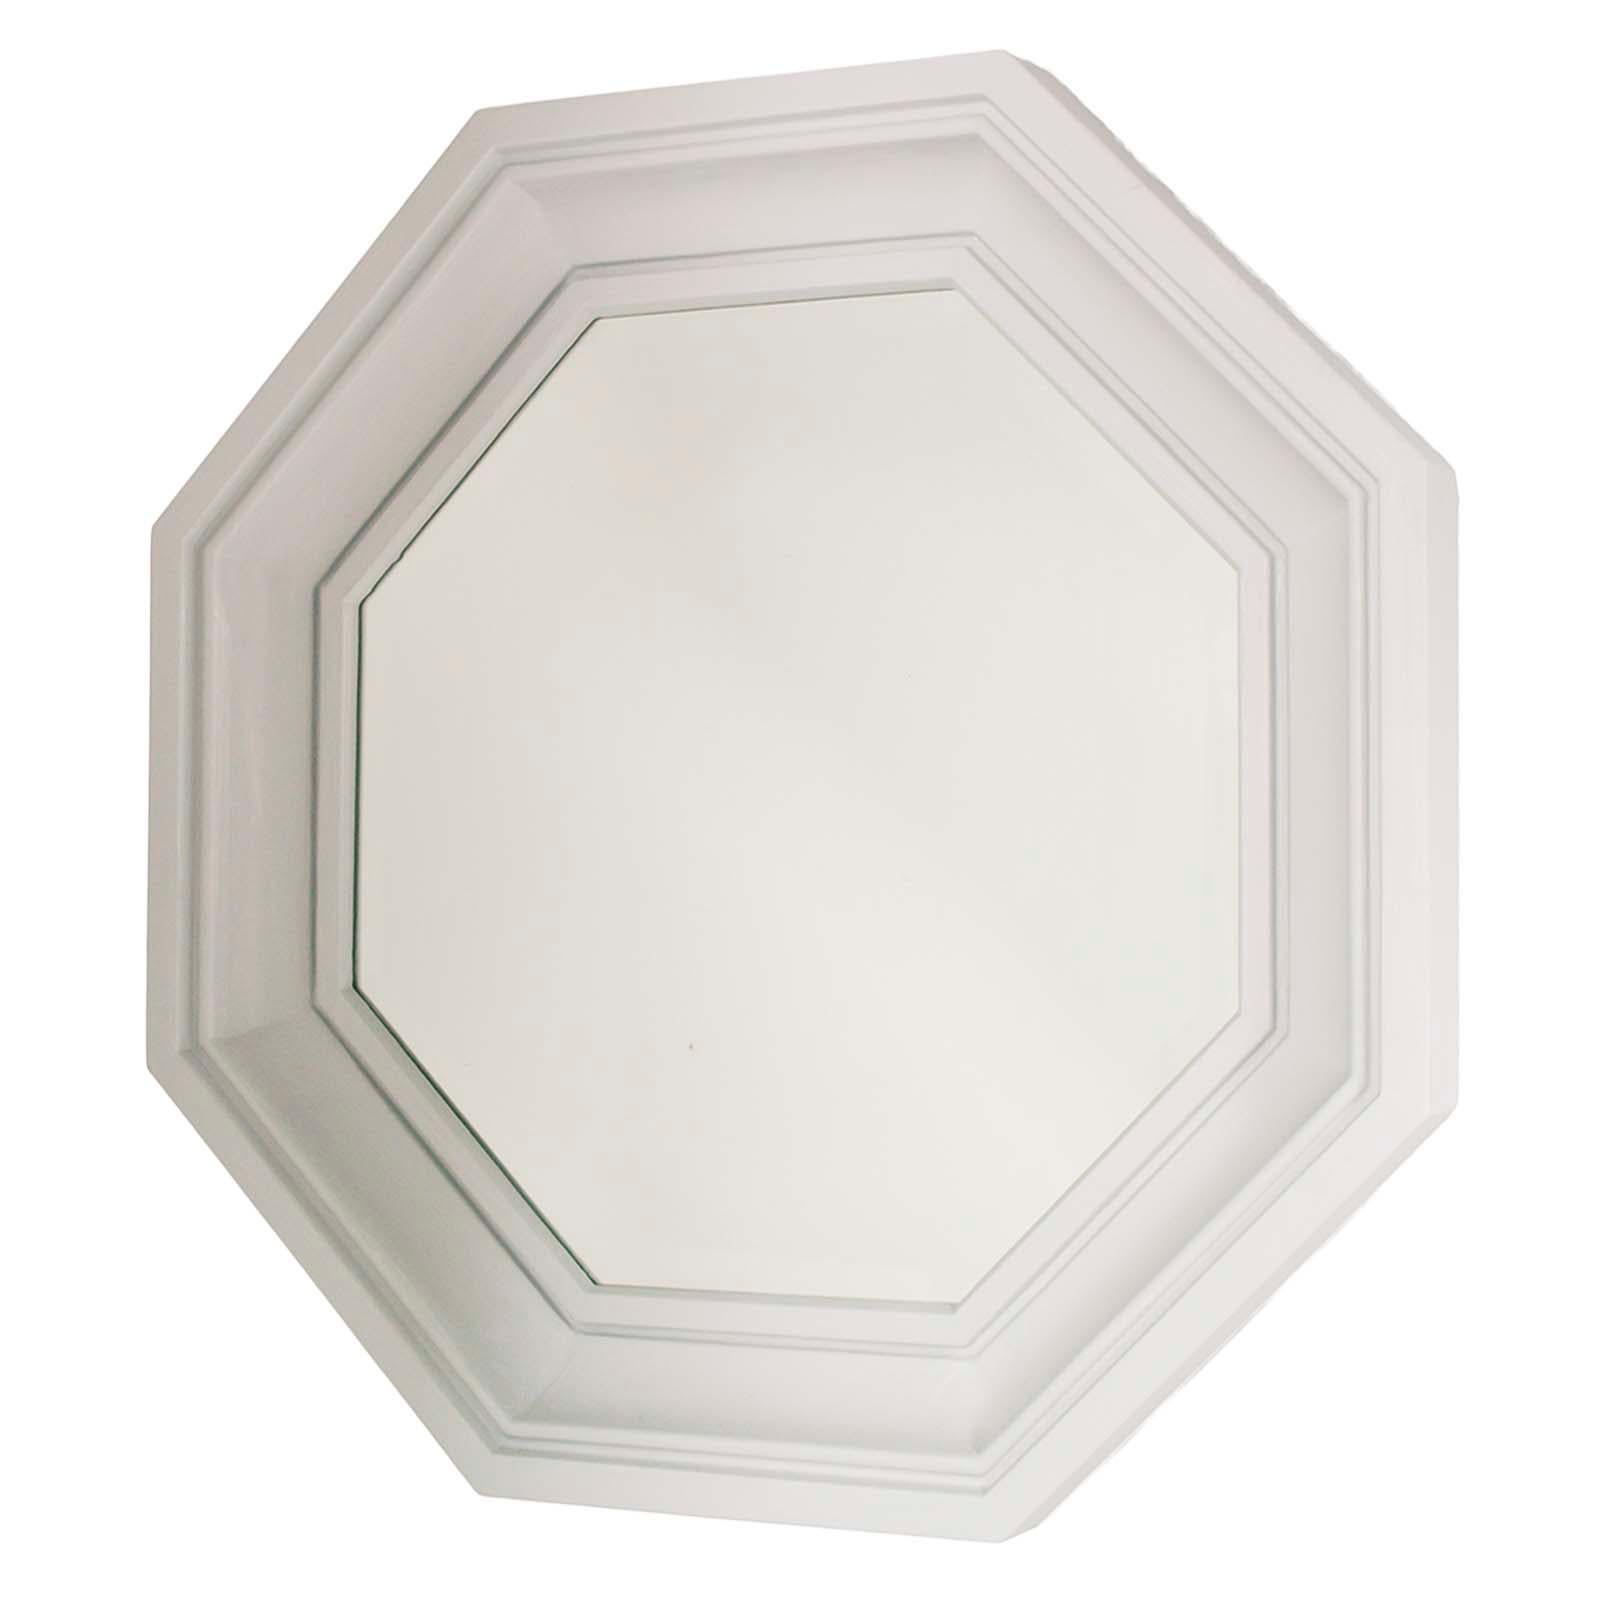 Large 1970s octagonal wall mirror in painted wood by Bottega Gadda, Milan.


Bottega Gadda - Milano
In 1970 Bottega Gadda was founded by Carlo Gadda, a sculptor, painter, engraver and professor of drawing at the Academy of fine Arts. Gadda first